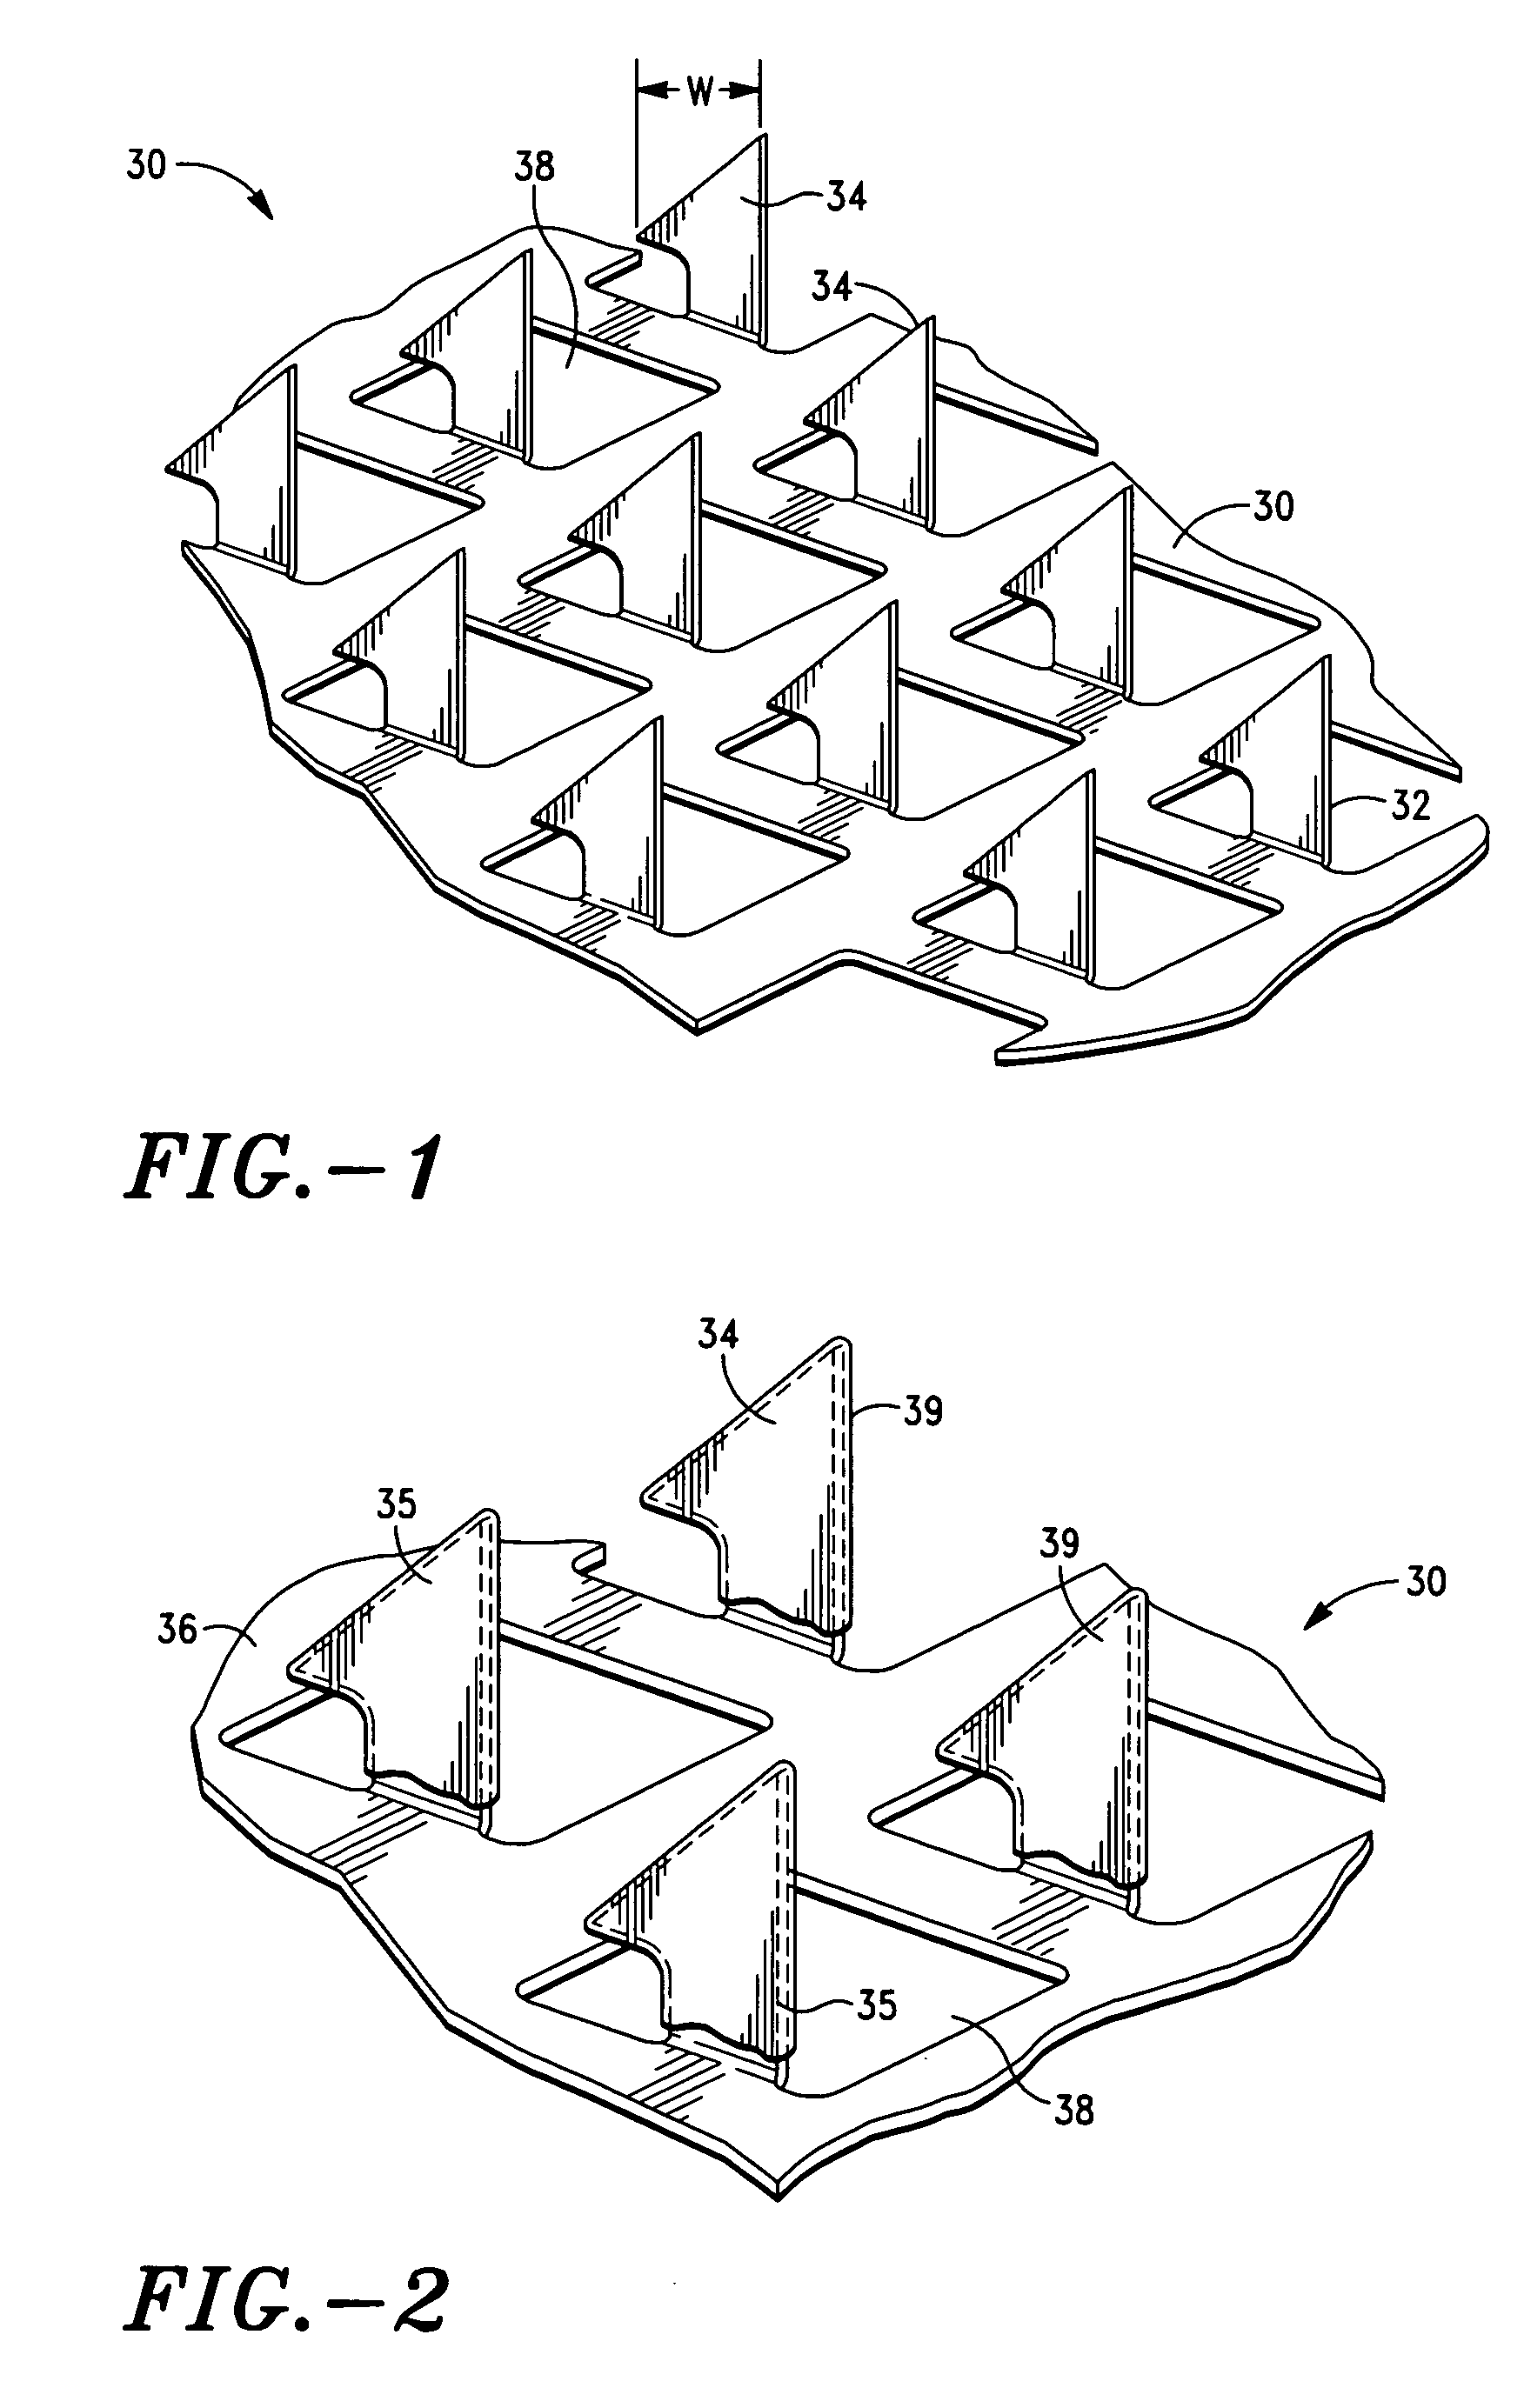 Apparatus and method for transdermal delivery of fentanyl-based agents